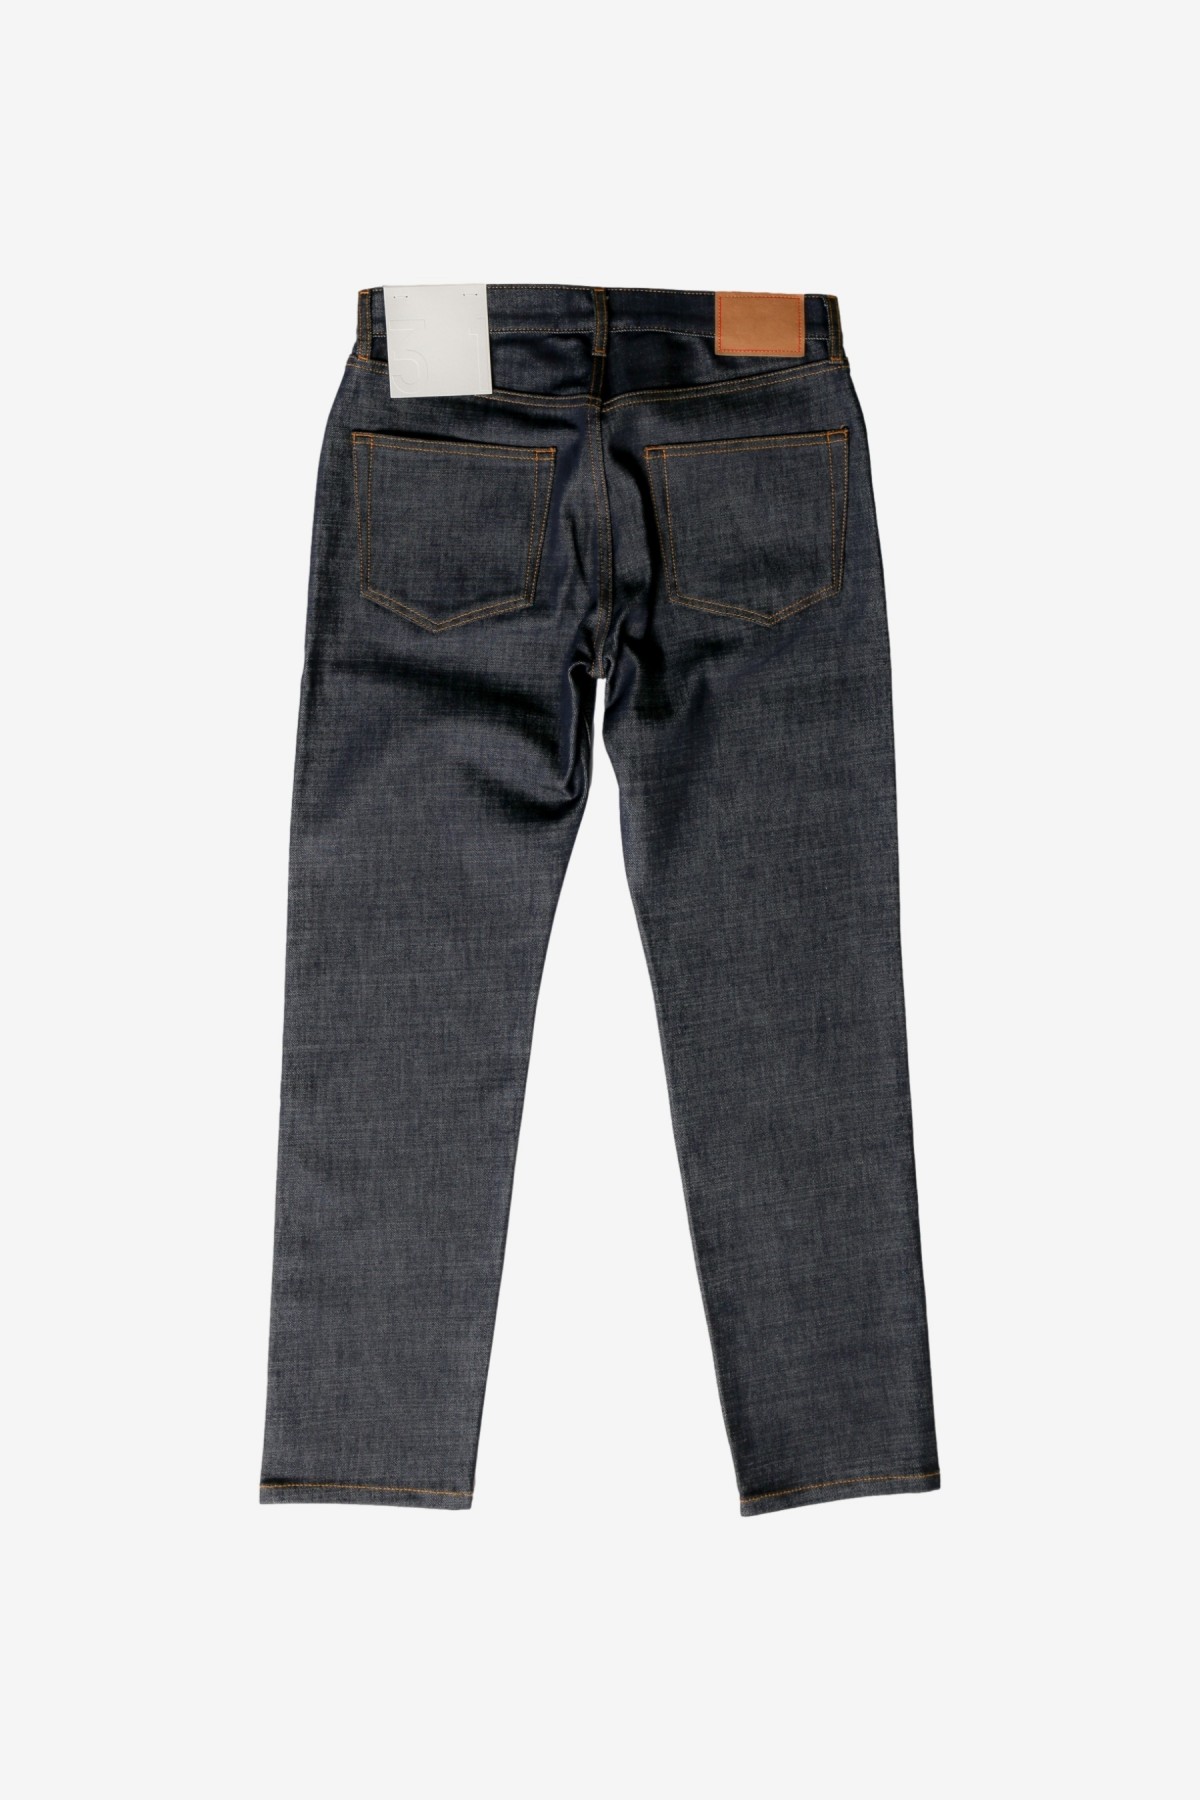 Jeanerica TM005 Tapered Jeans in Blue Raw